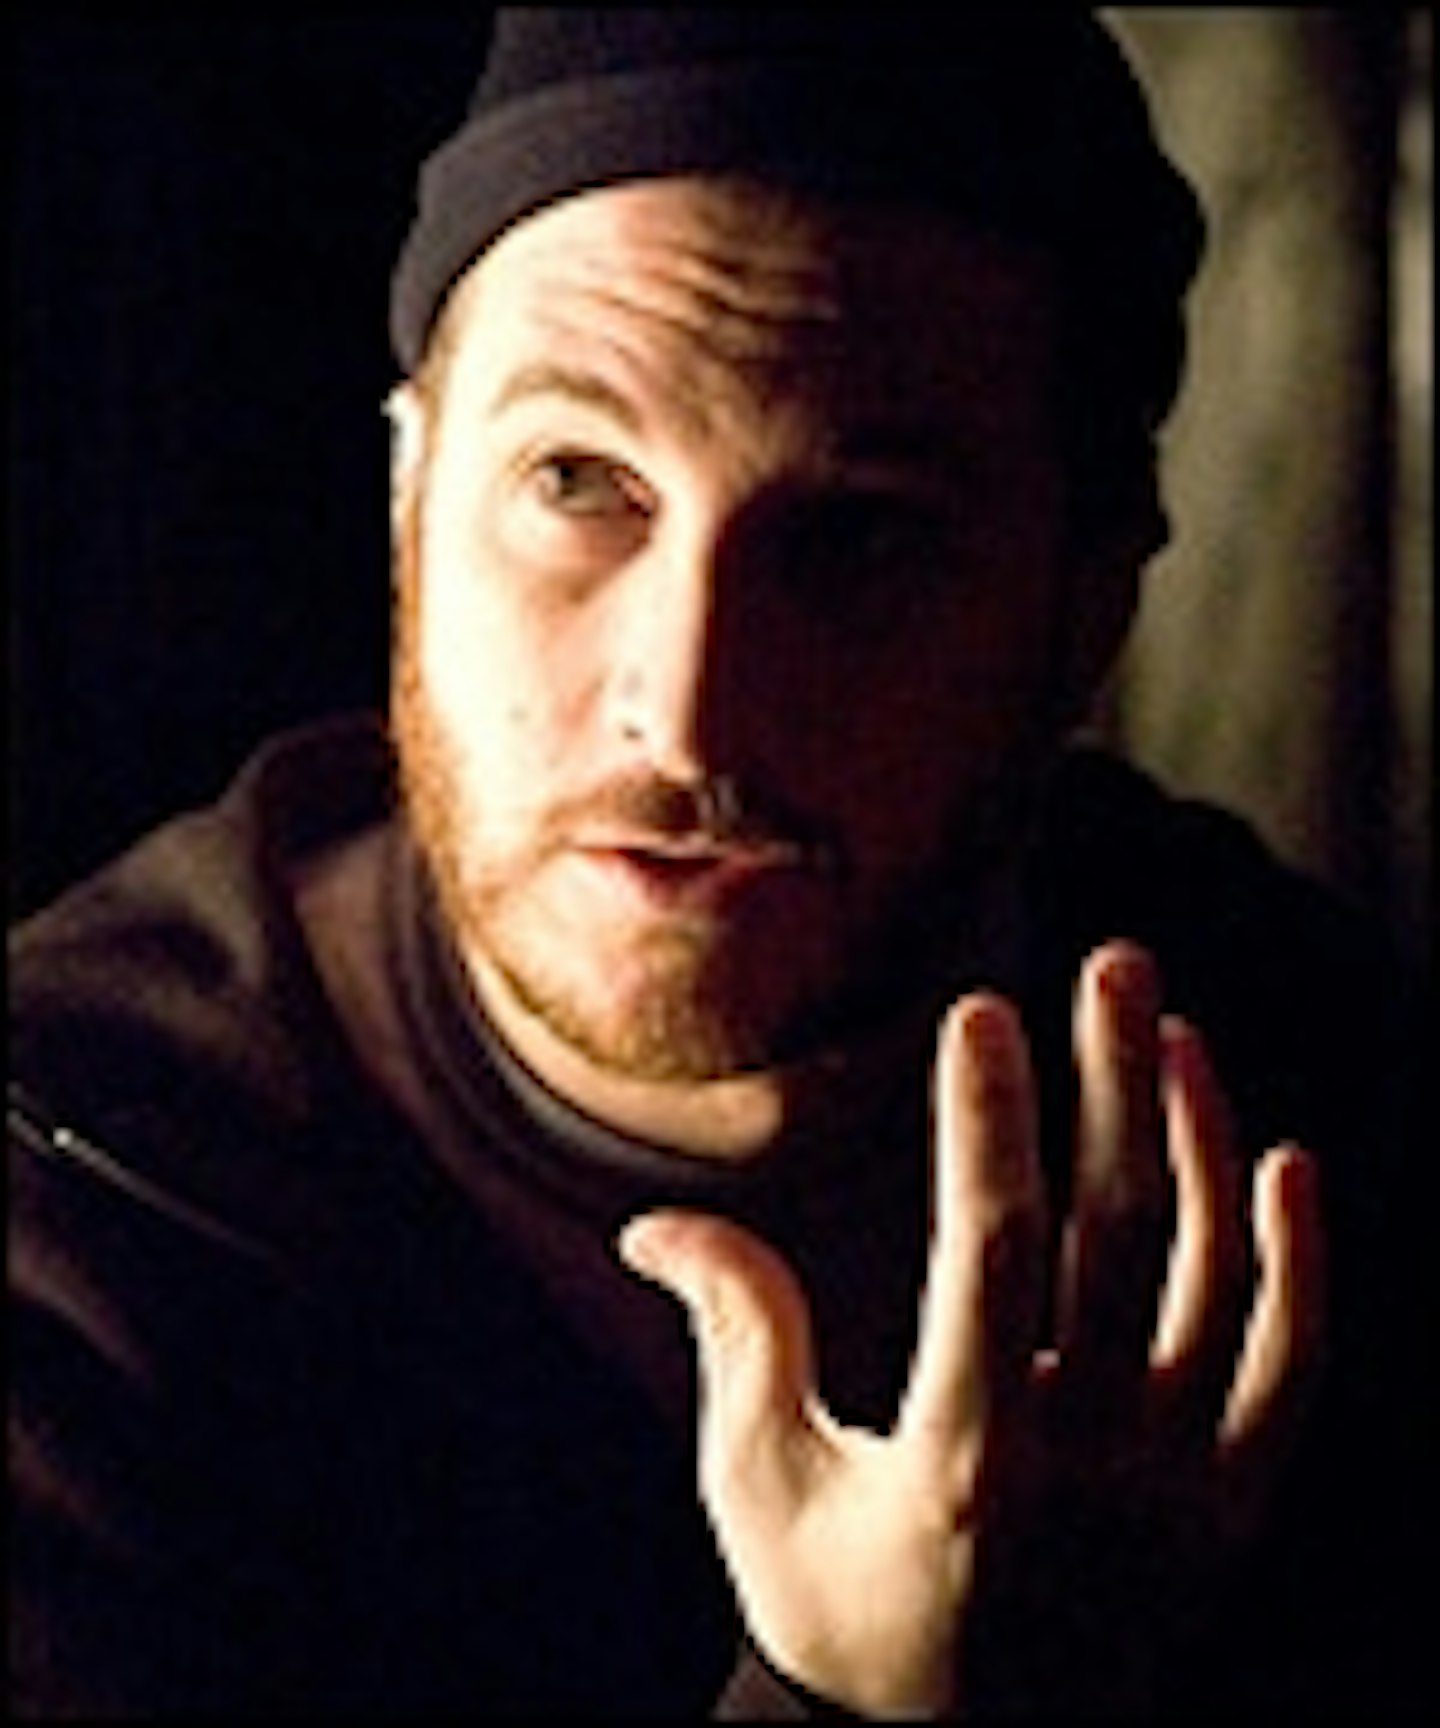 Exclusive: Aronofsky To Direct Noah